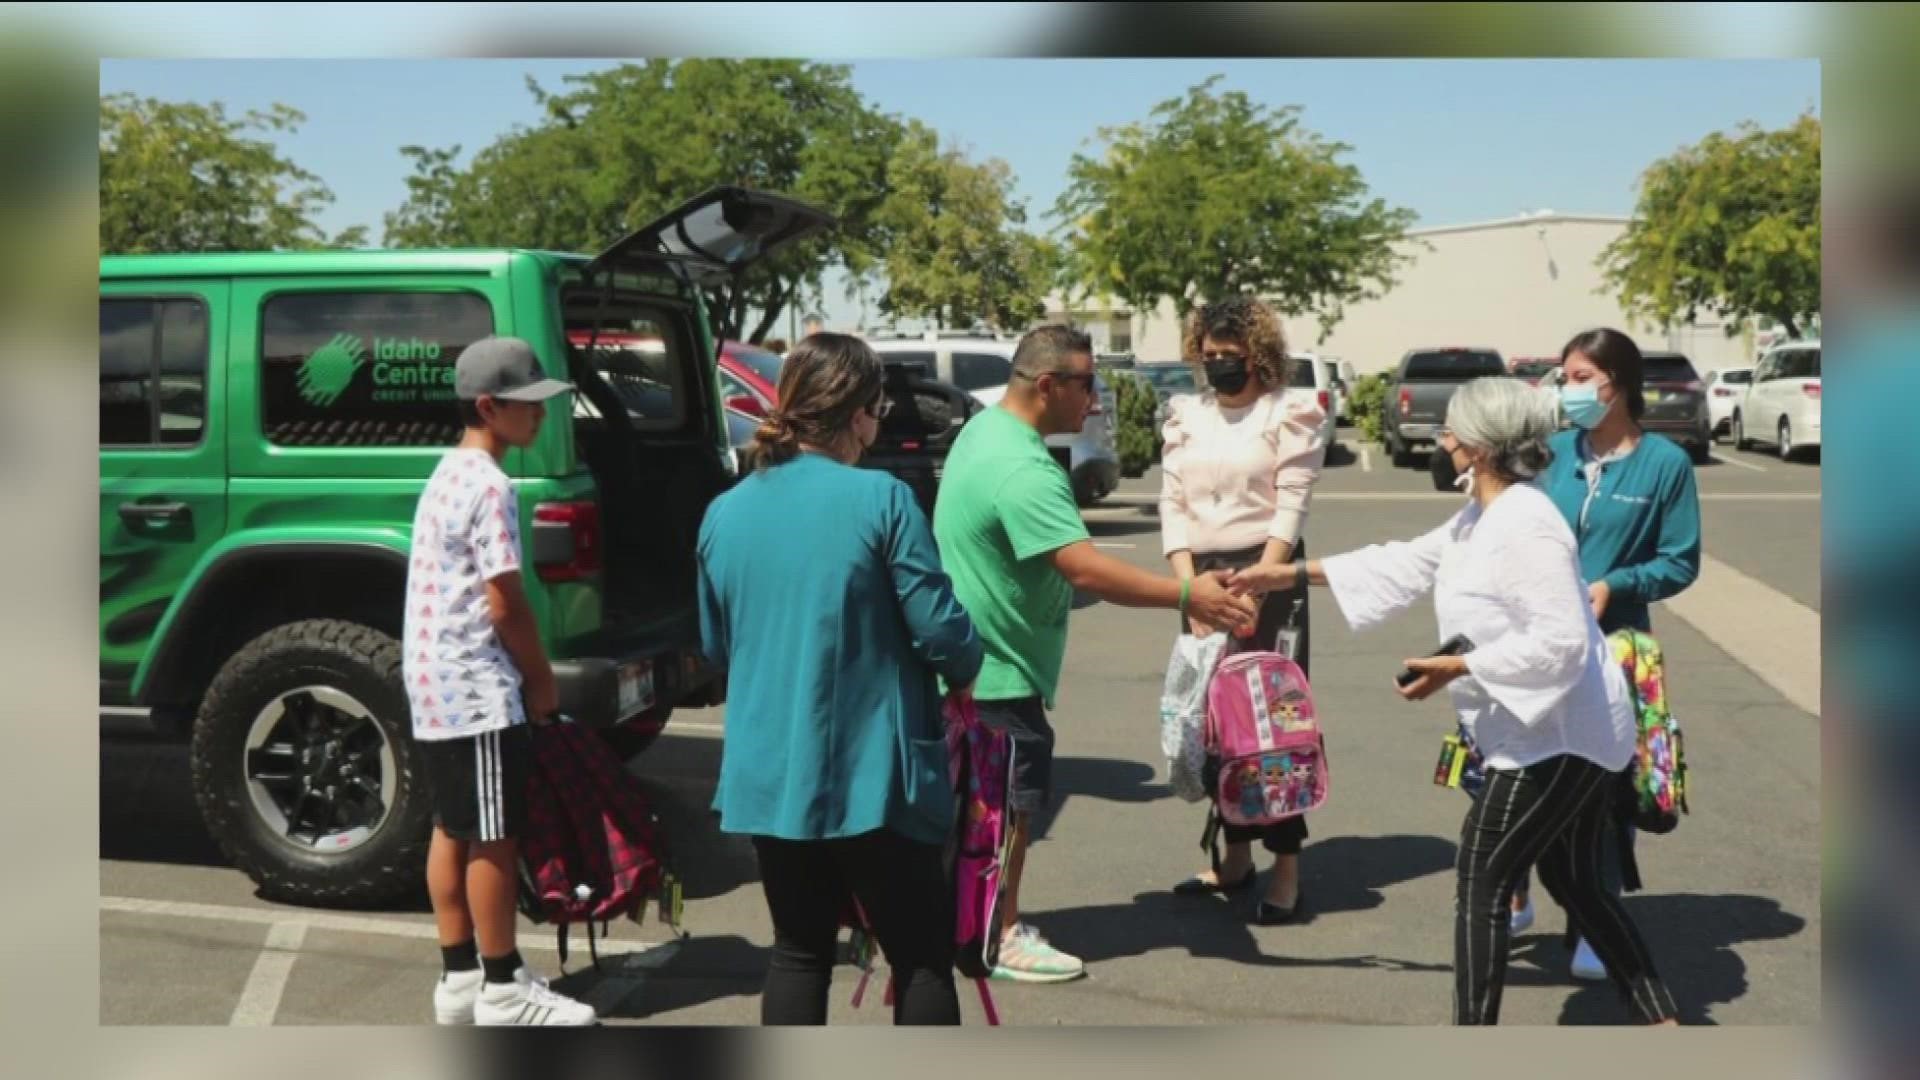 The Community Council of Idaho gave out more than 200 backpacks for Canyon County kids heading to kindergarten.